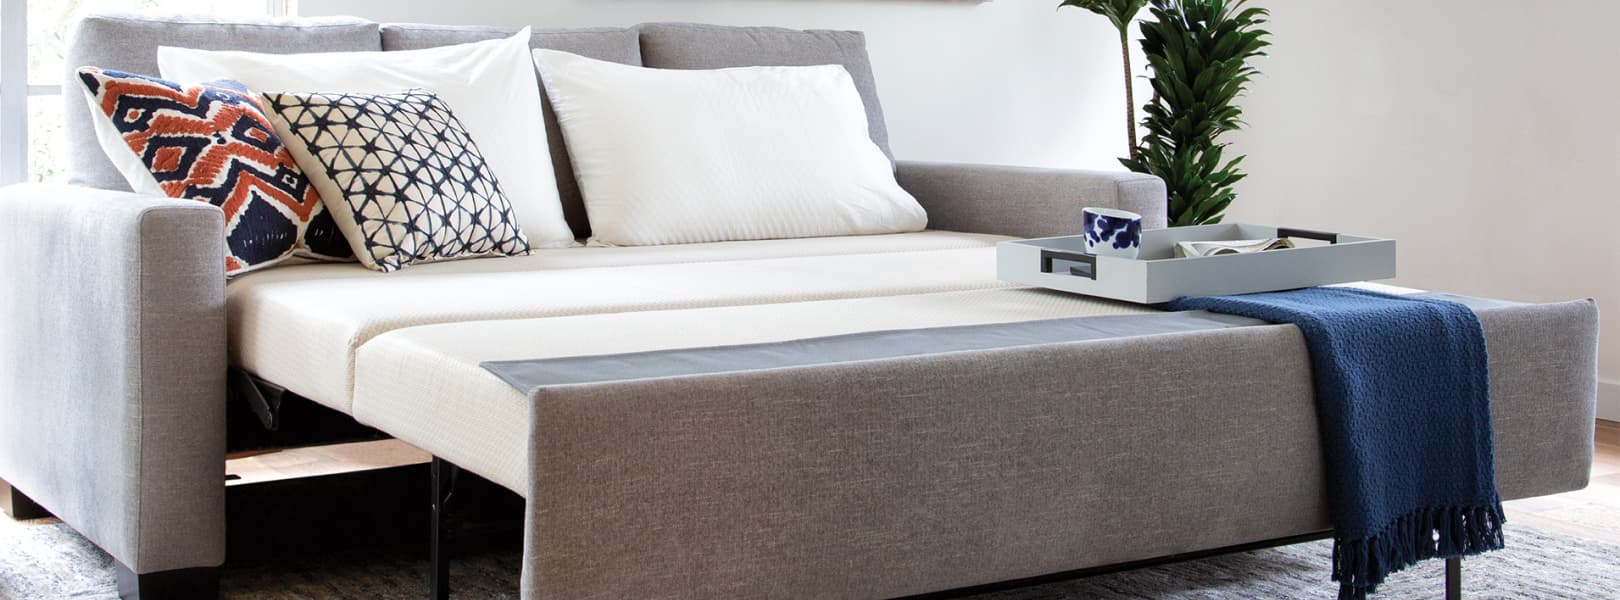 How To Open Sofa Bed